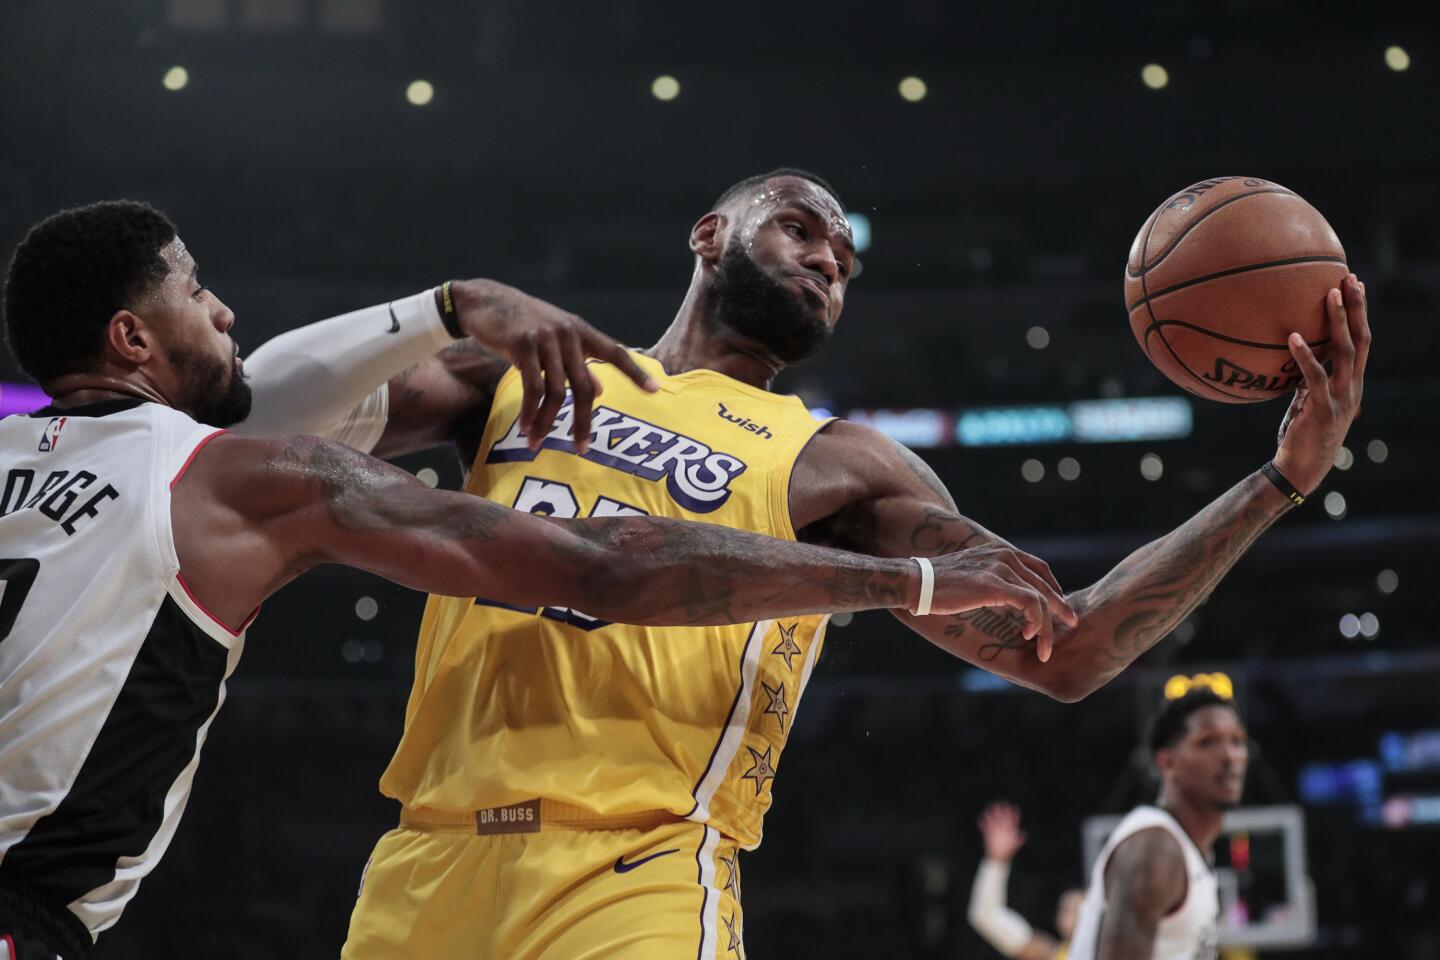 Lakers forward LeBron James tries to control a rebound against Clippers forward Paul George.